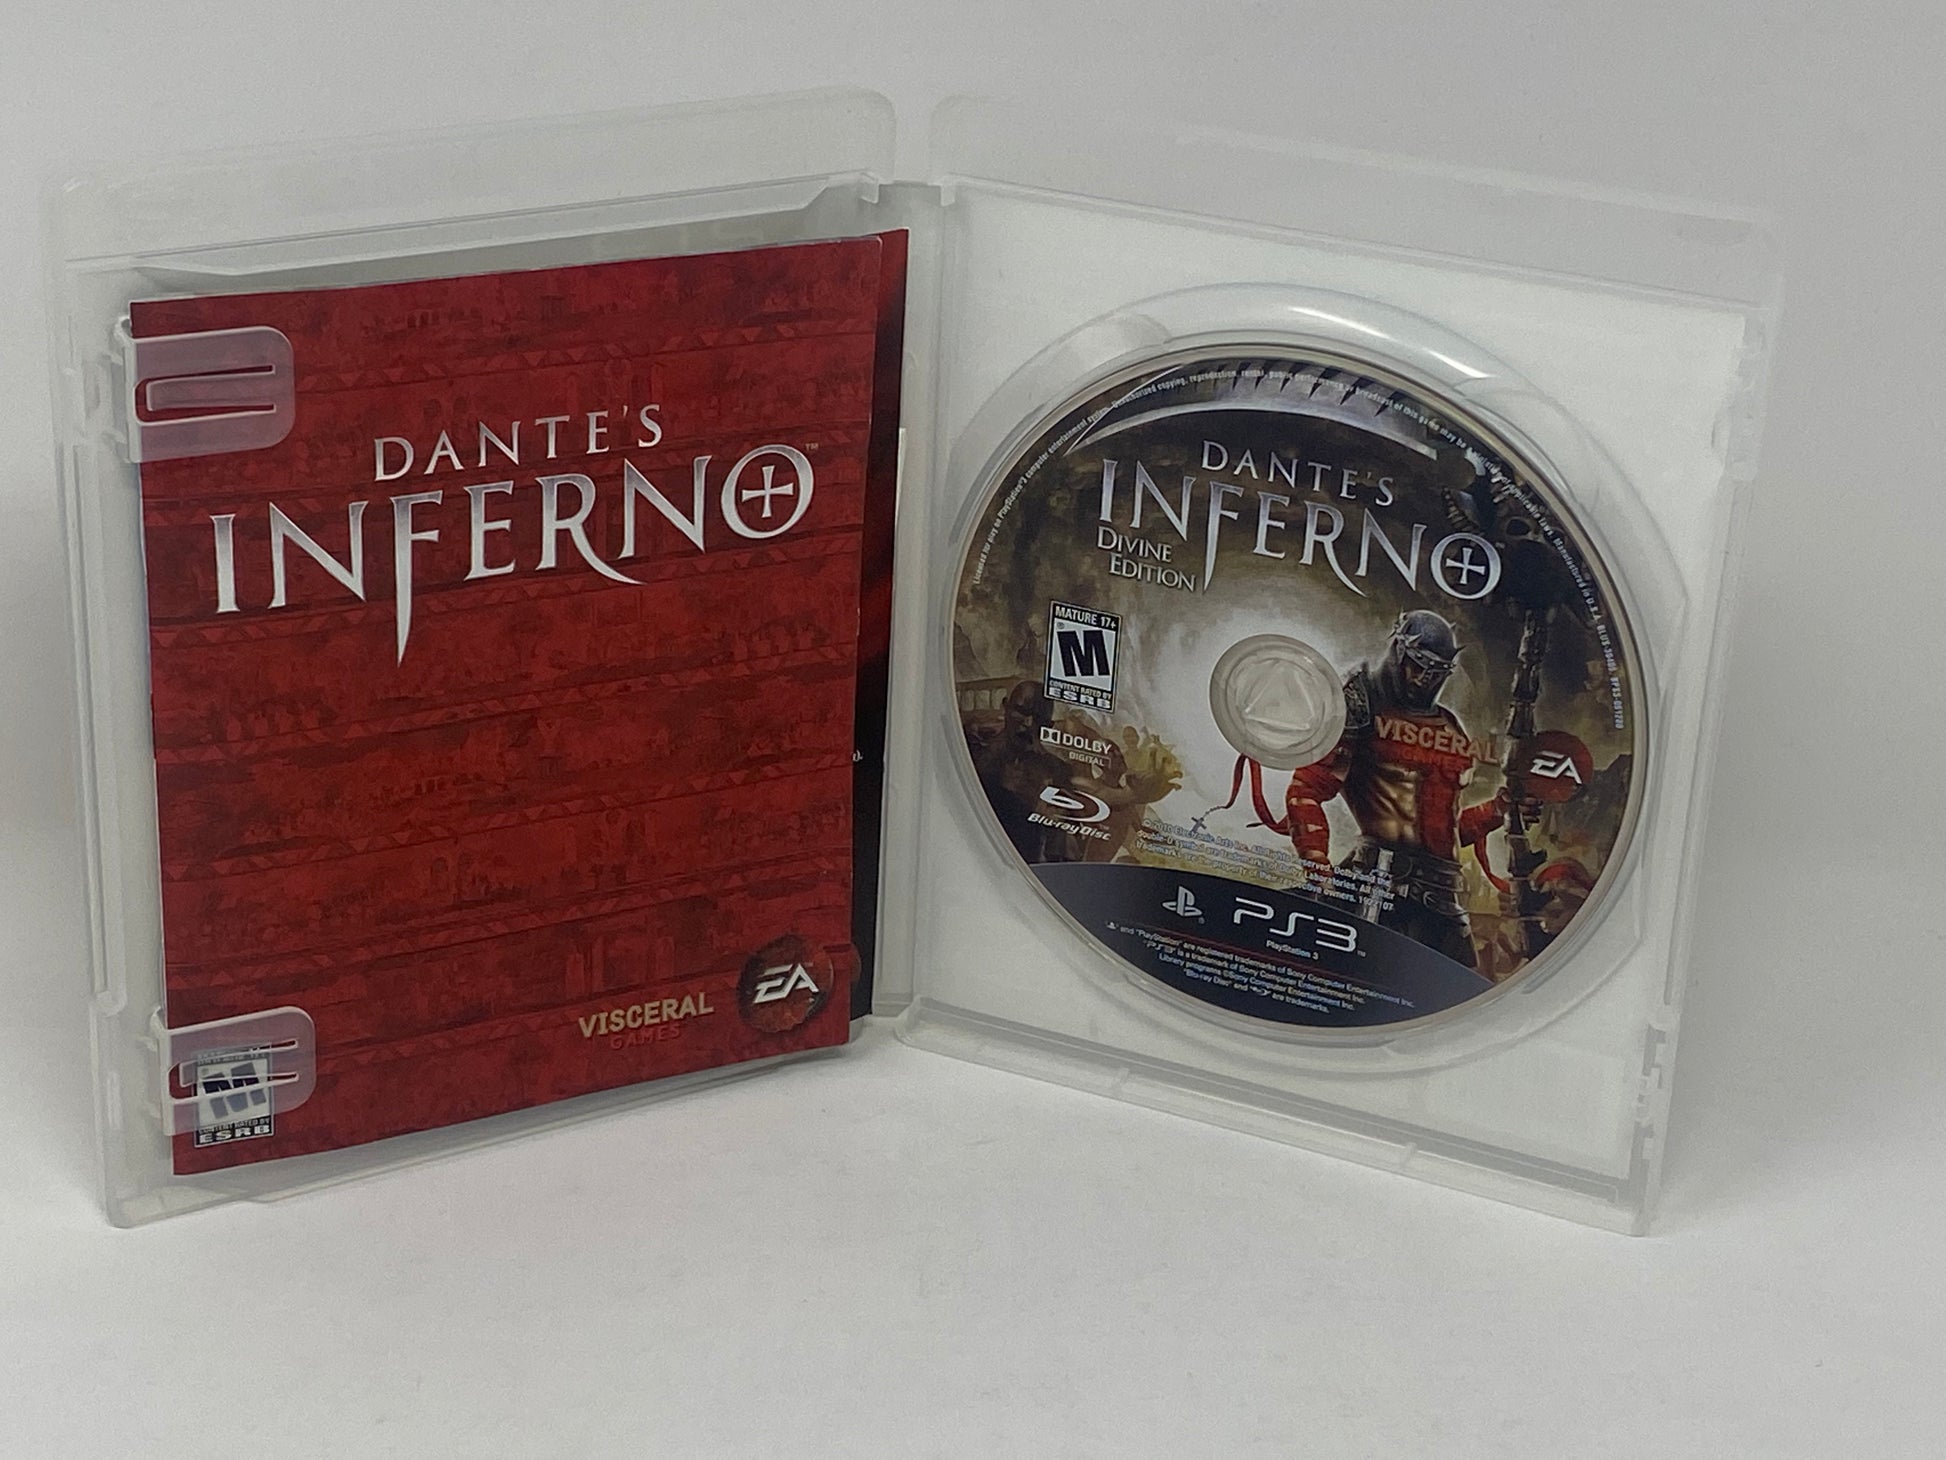 Sony PlayStation 3 PS3 - Dante's Inferno - Divine Edition – The